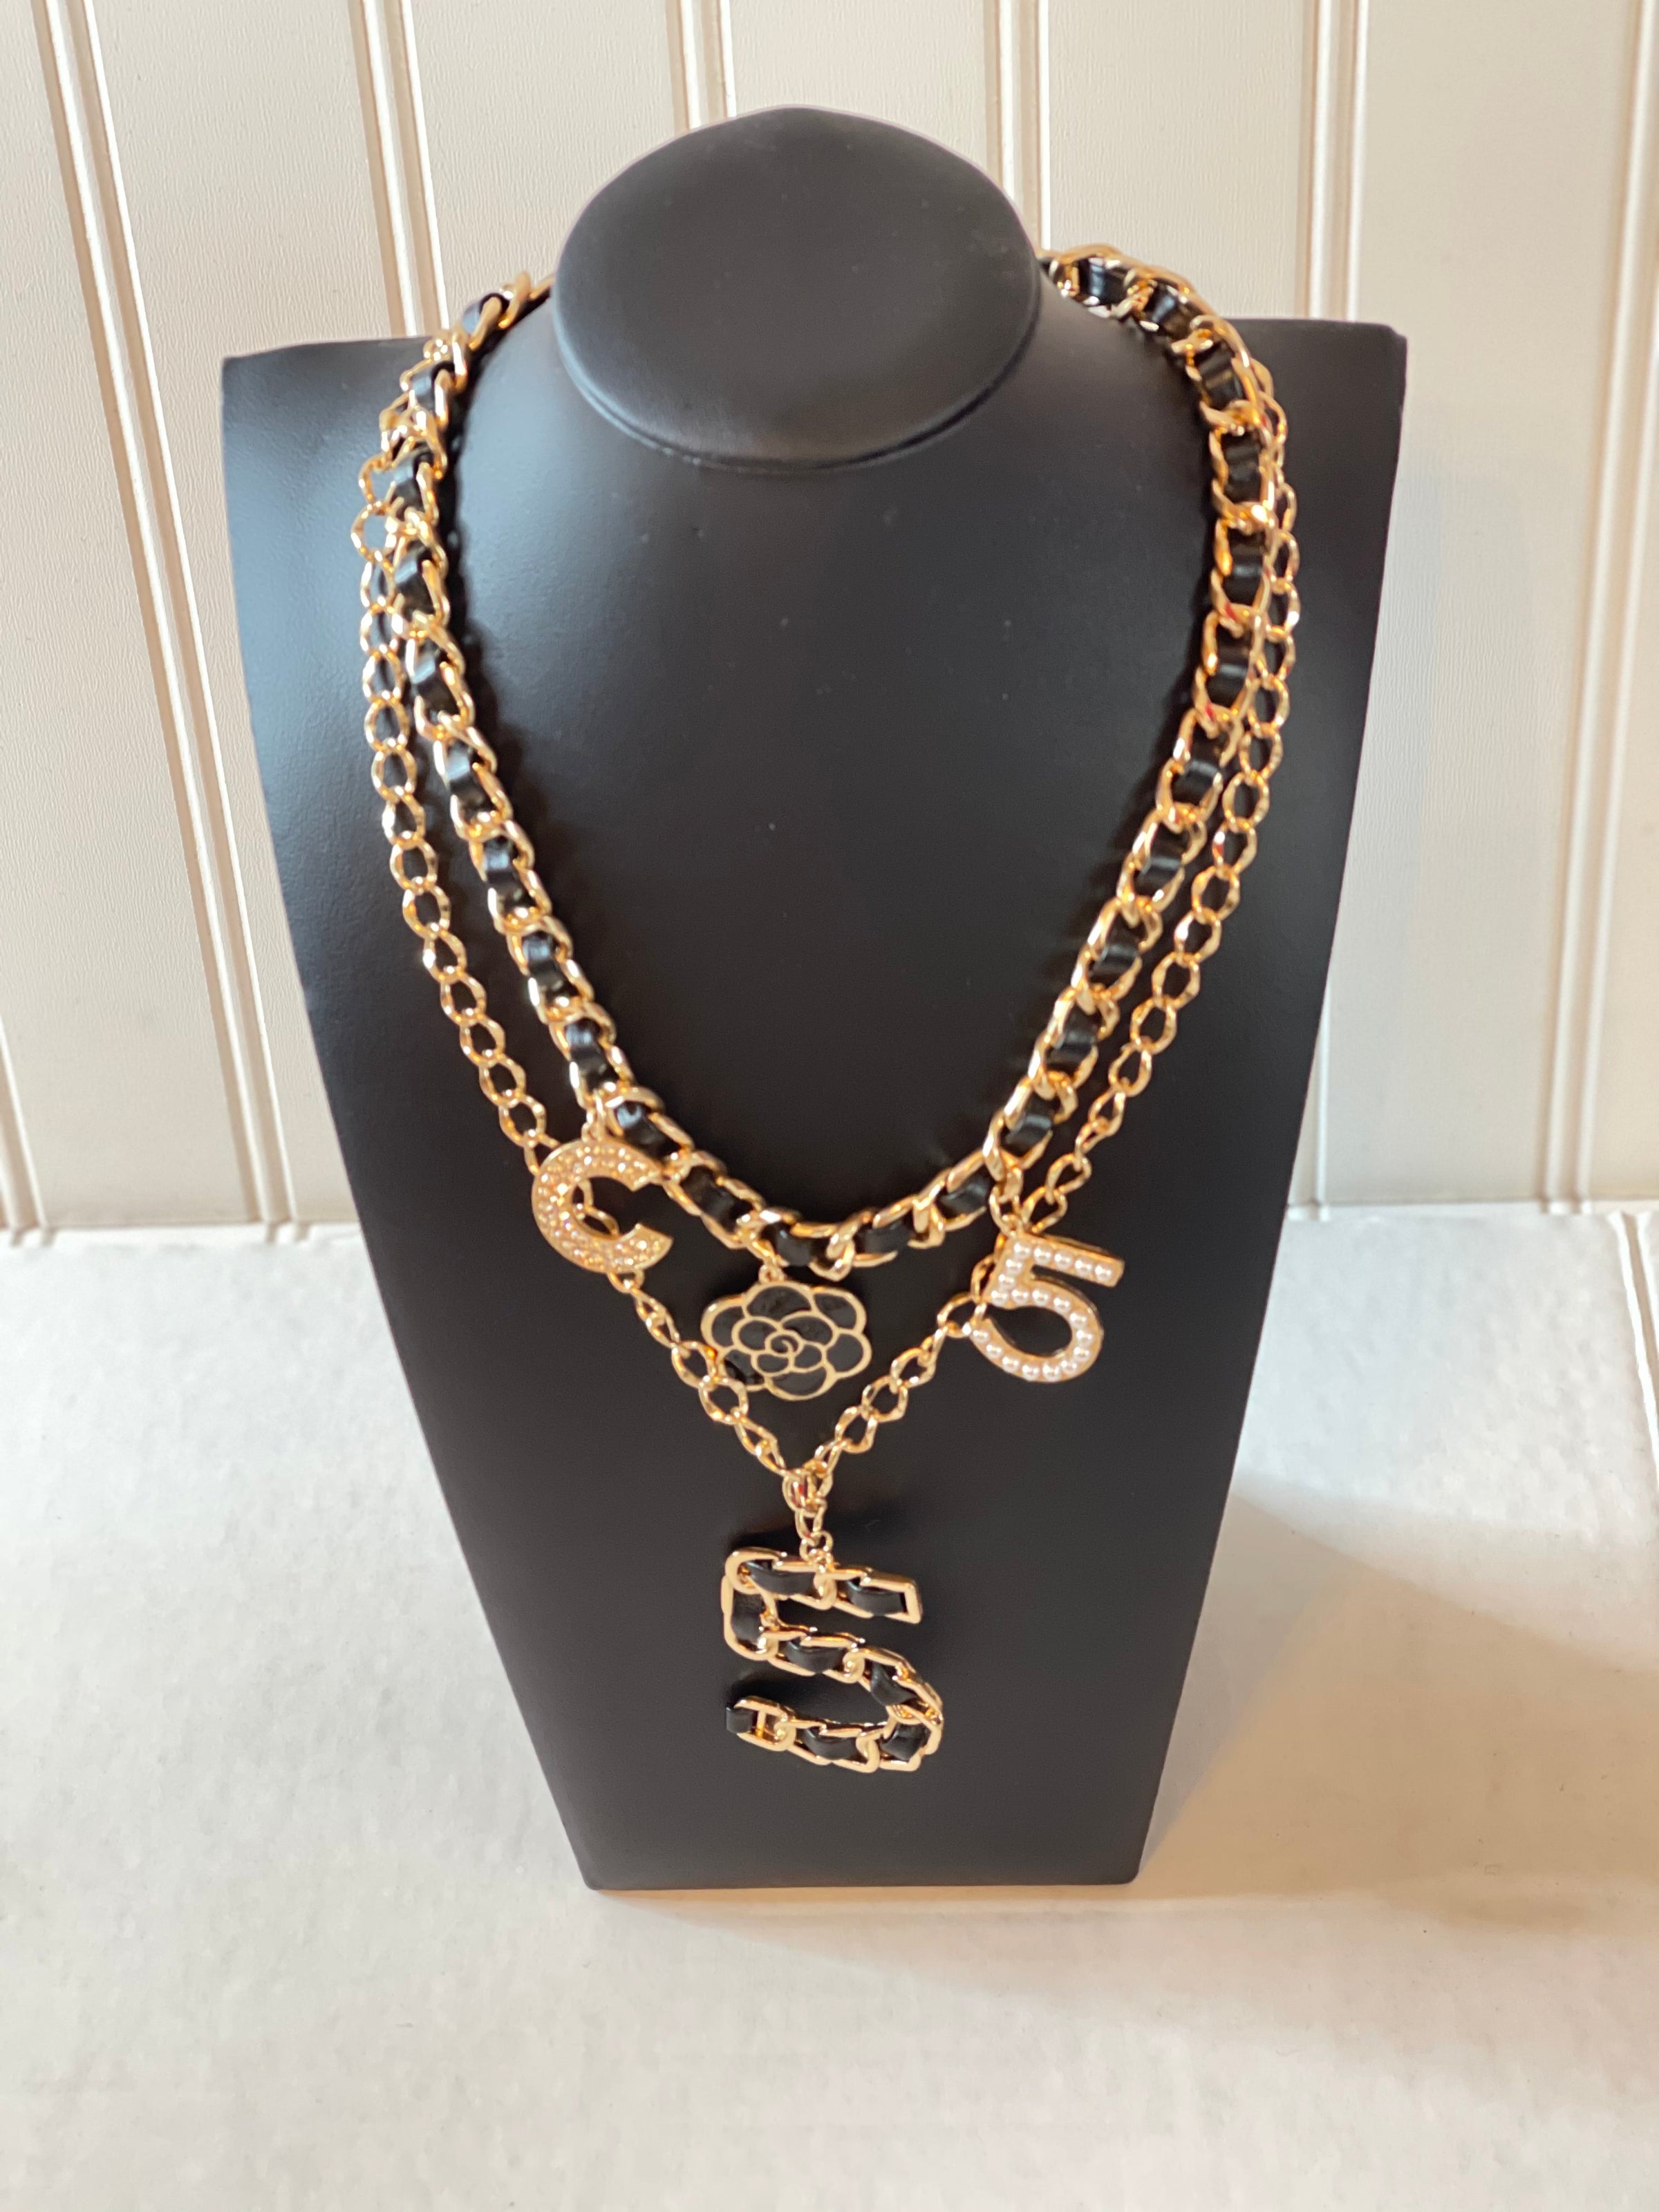 Black and Gold No. 5 Charm Necklace (Regular)